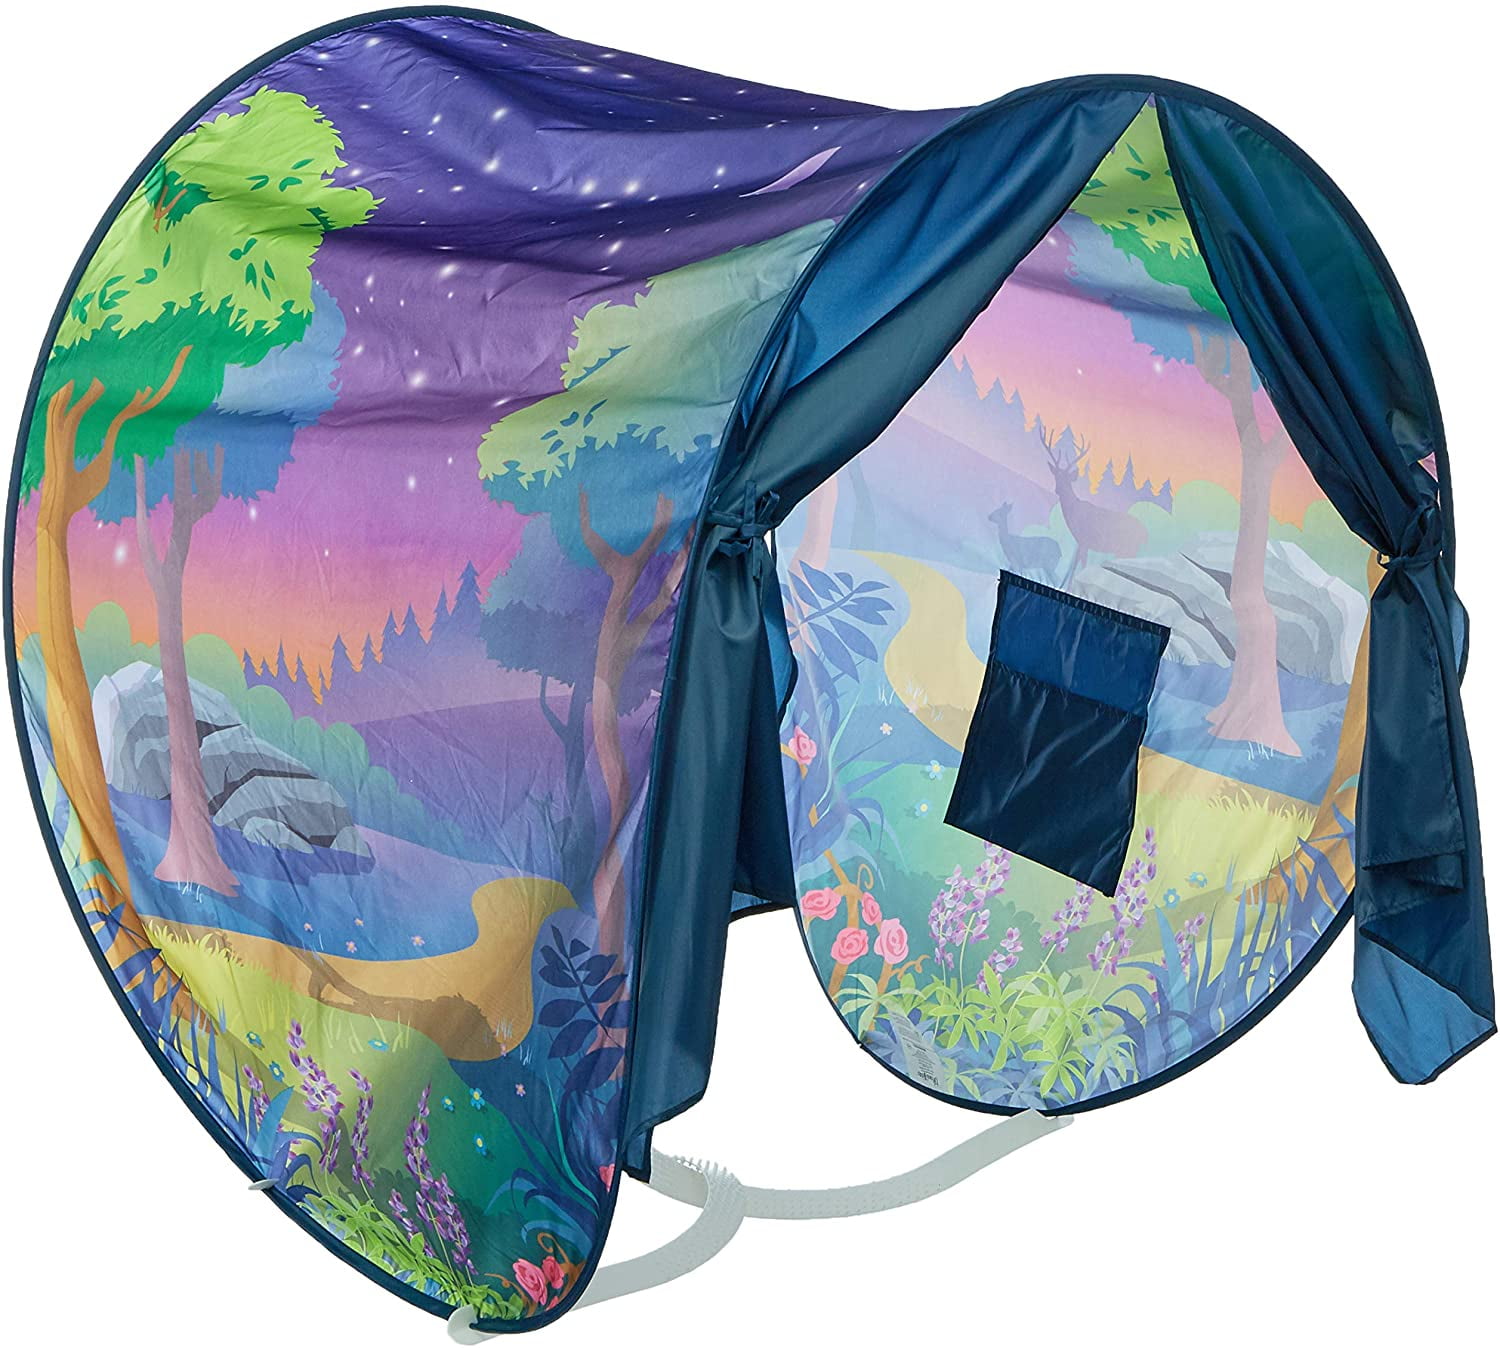 Kids Nickelodeon Paw Patrol Dream Tent Glow as Seen on TV Twin Bed Size for sale online 